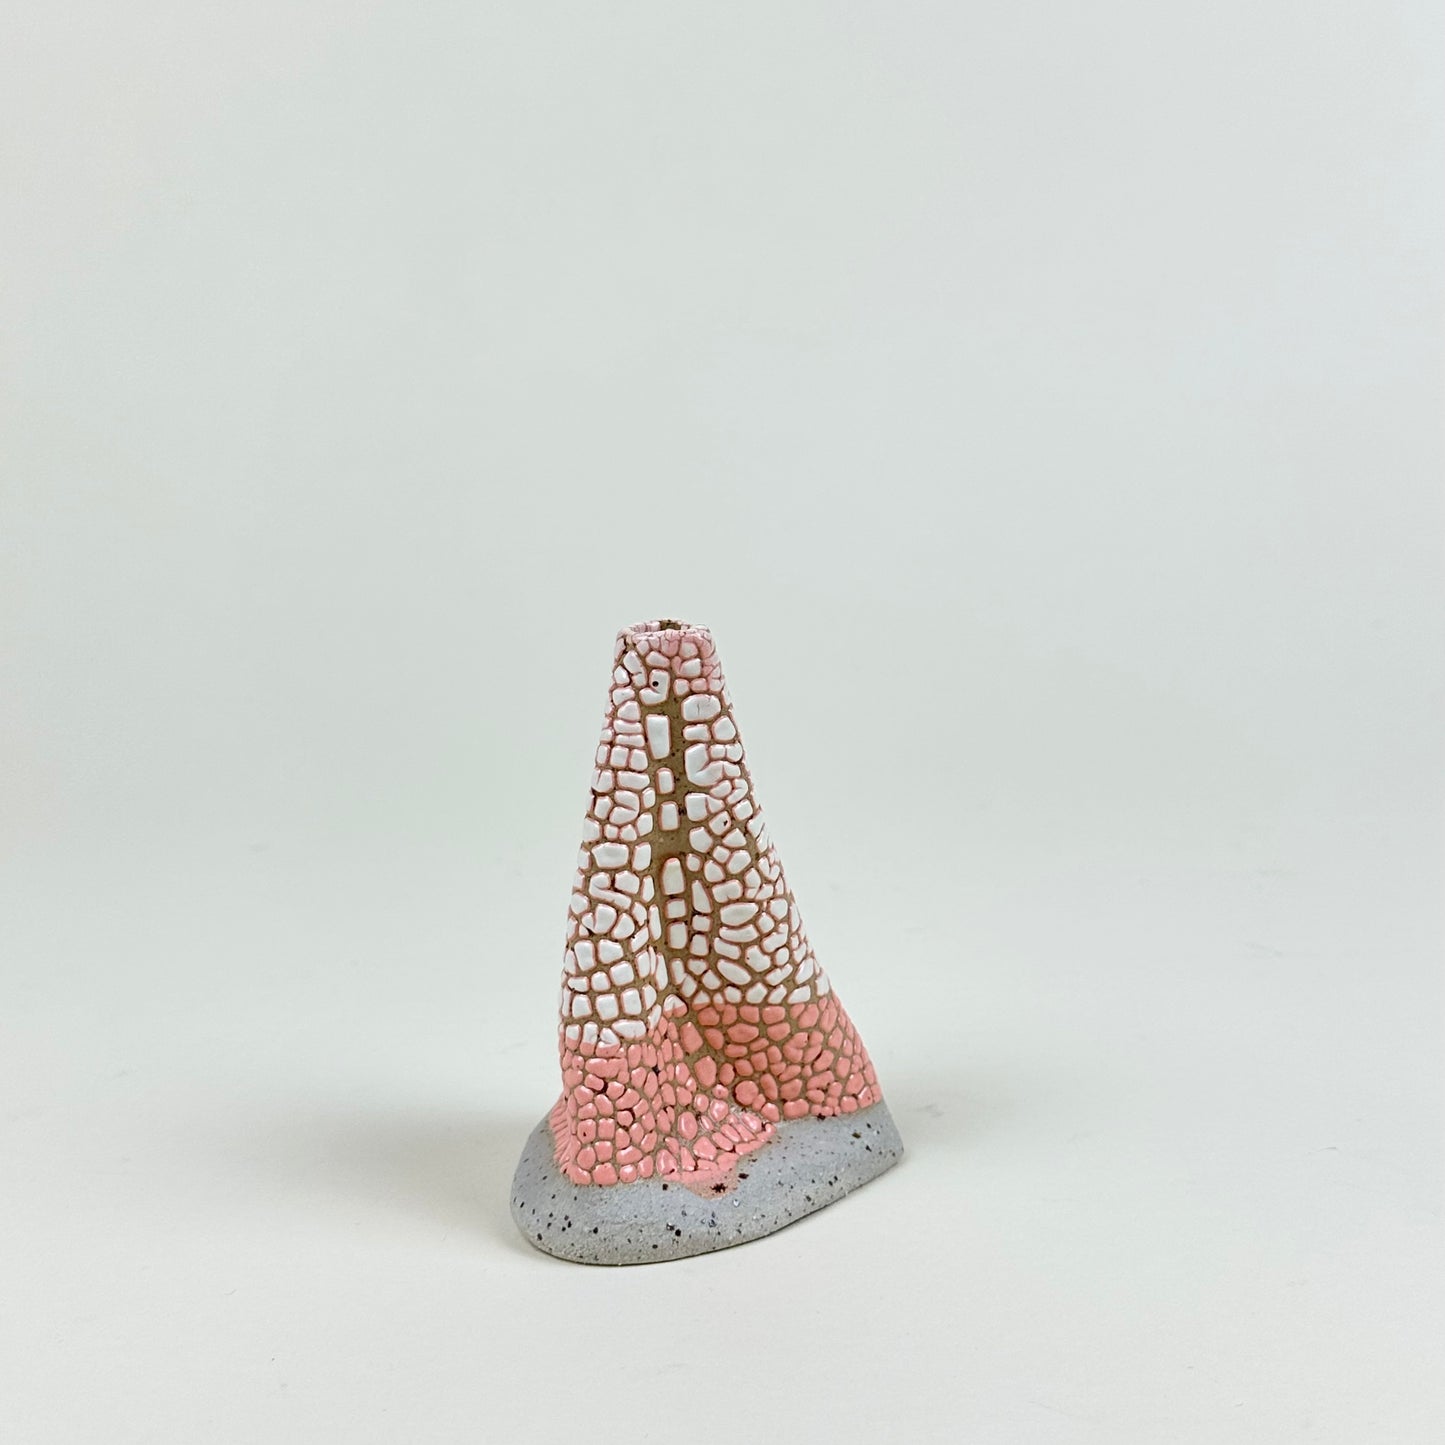 Light pink and pink volcano vase (S) by Astrid Öhman.